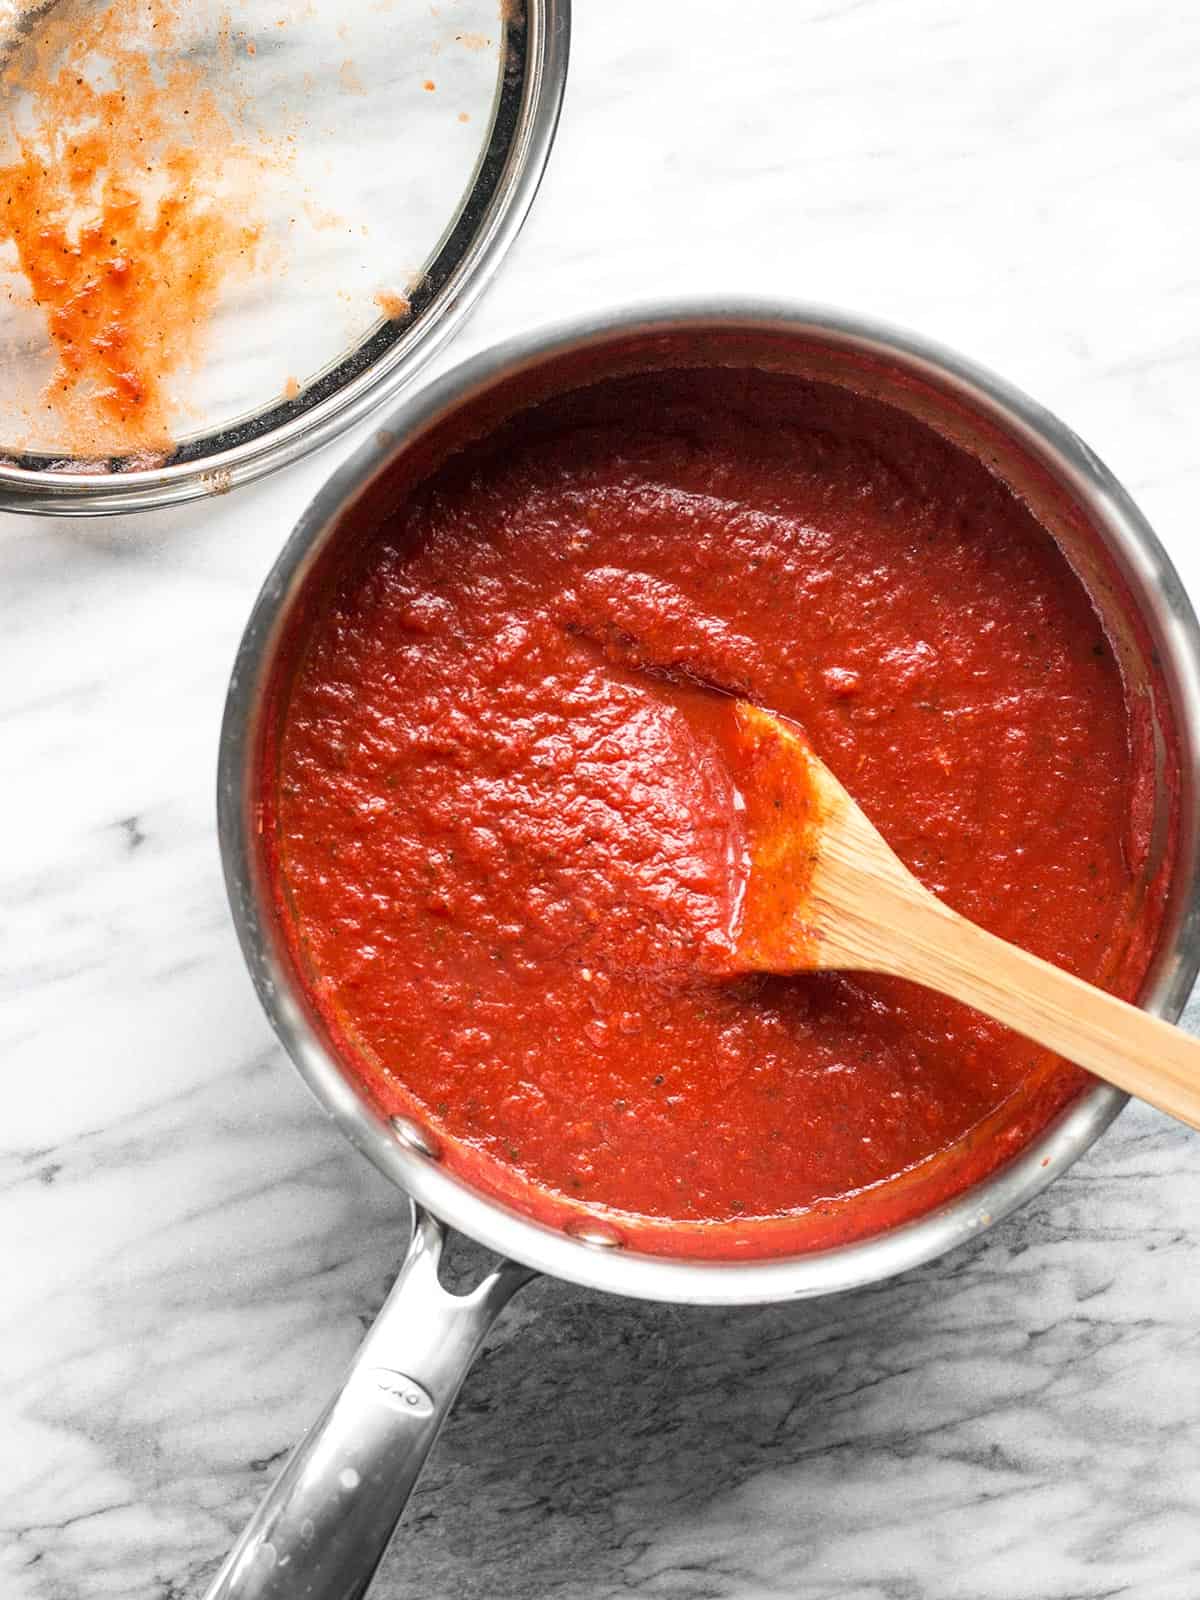 Overhead view of a sauce pot full of pizza sauce with a wooden spoon in the center.